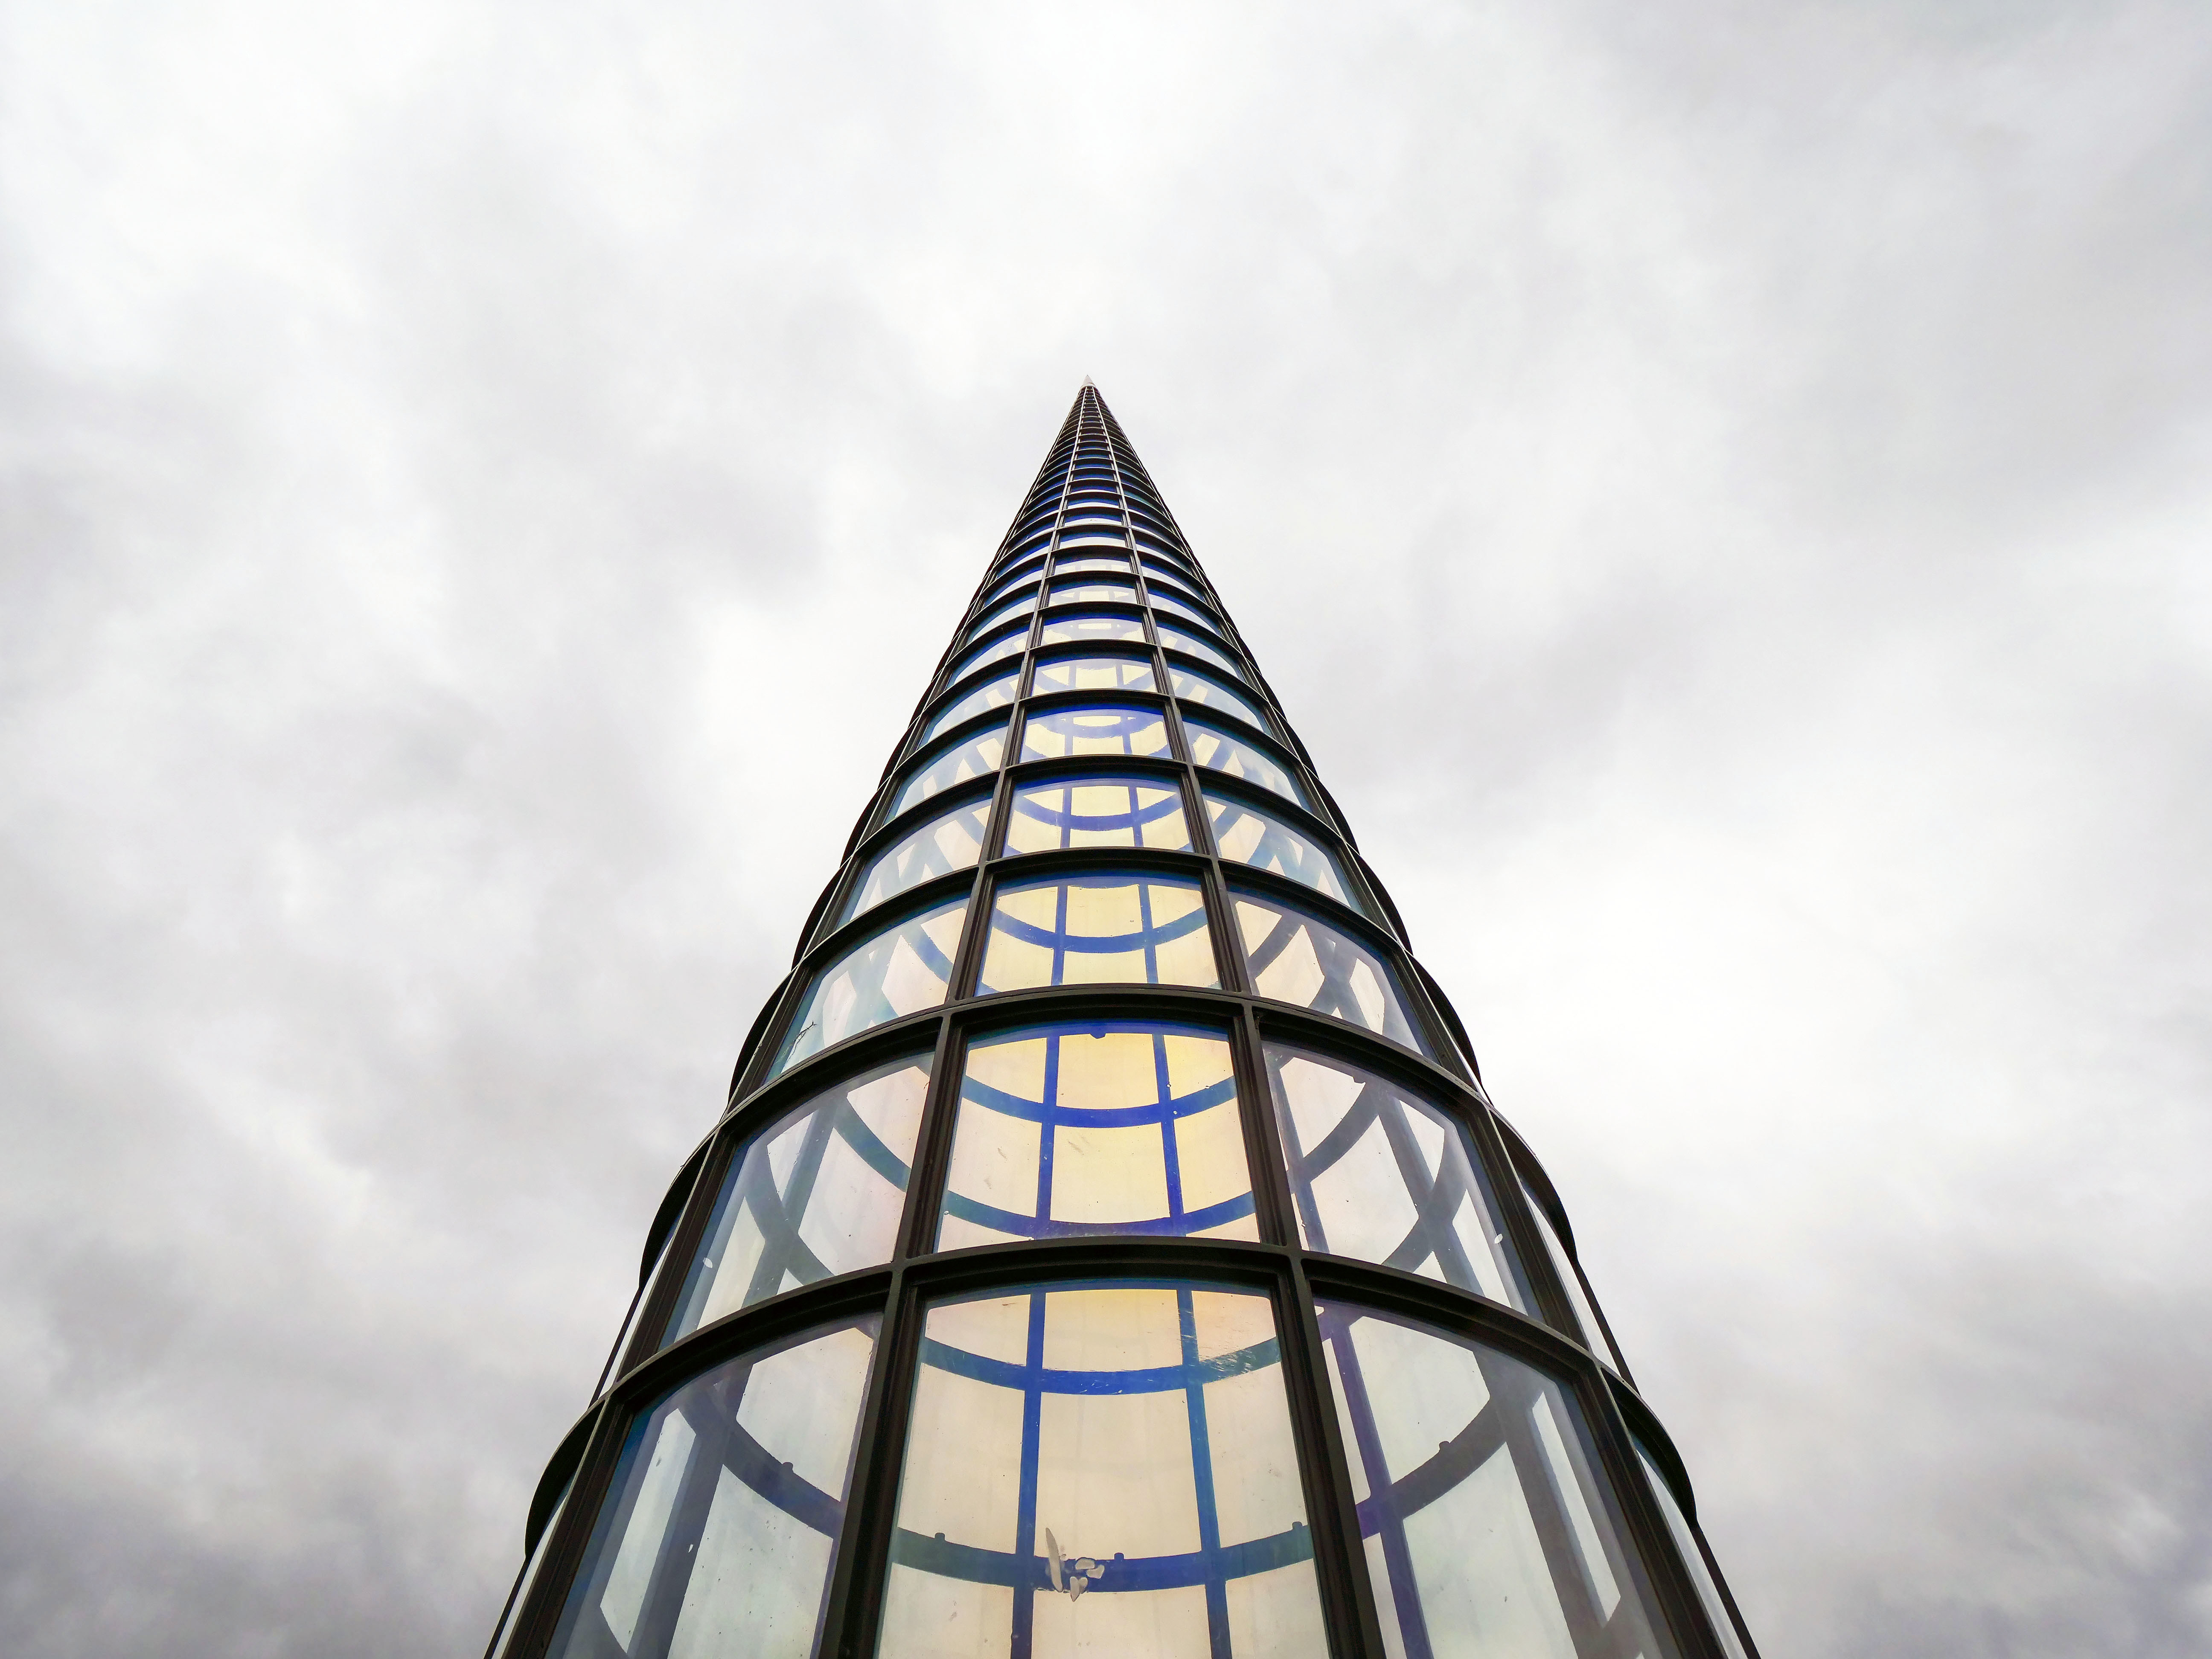 Looking up towards a tall pointed tower, with glass panels